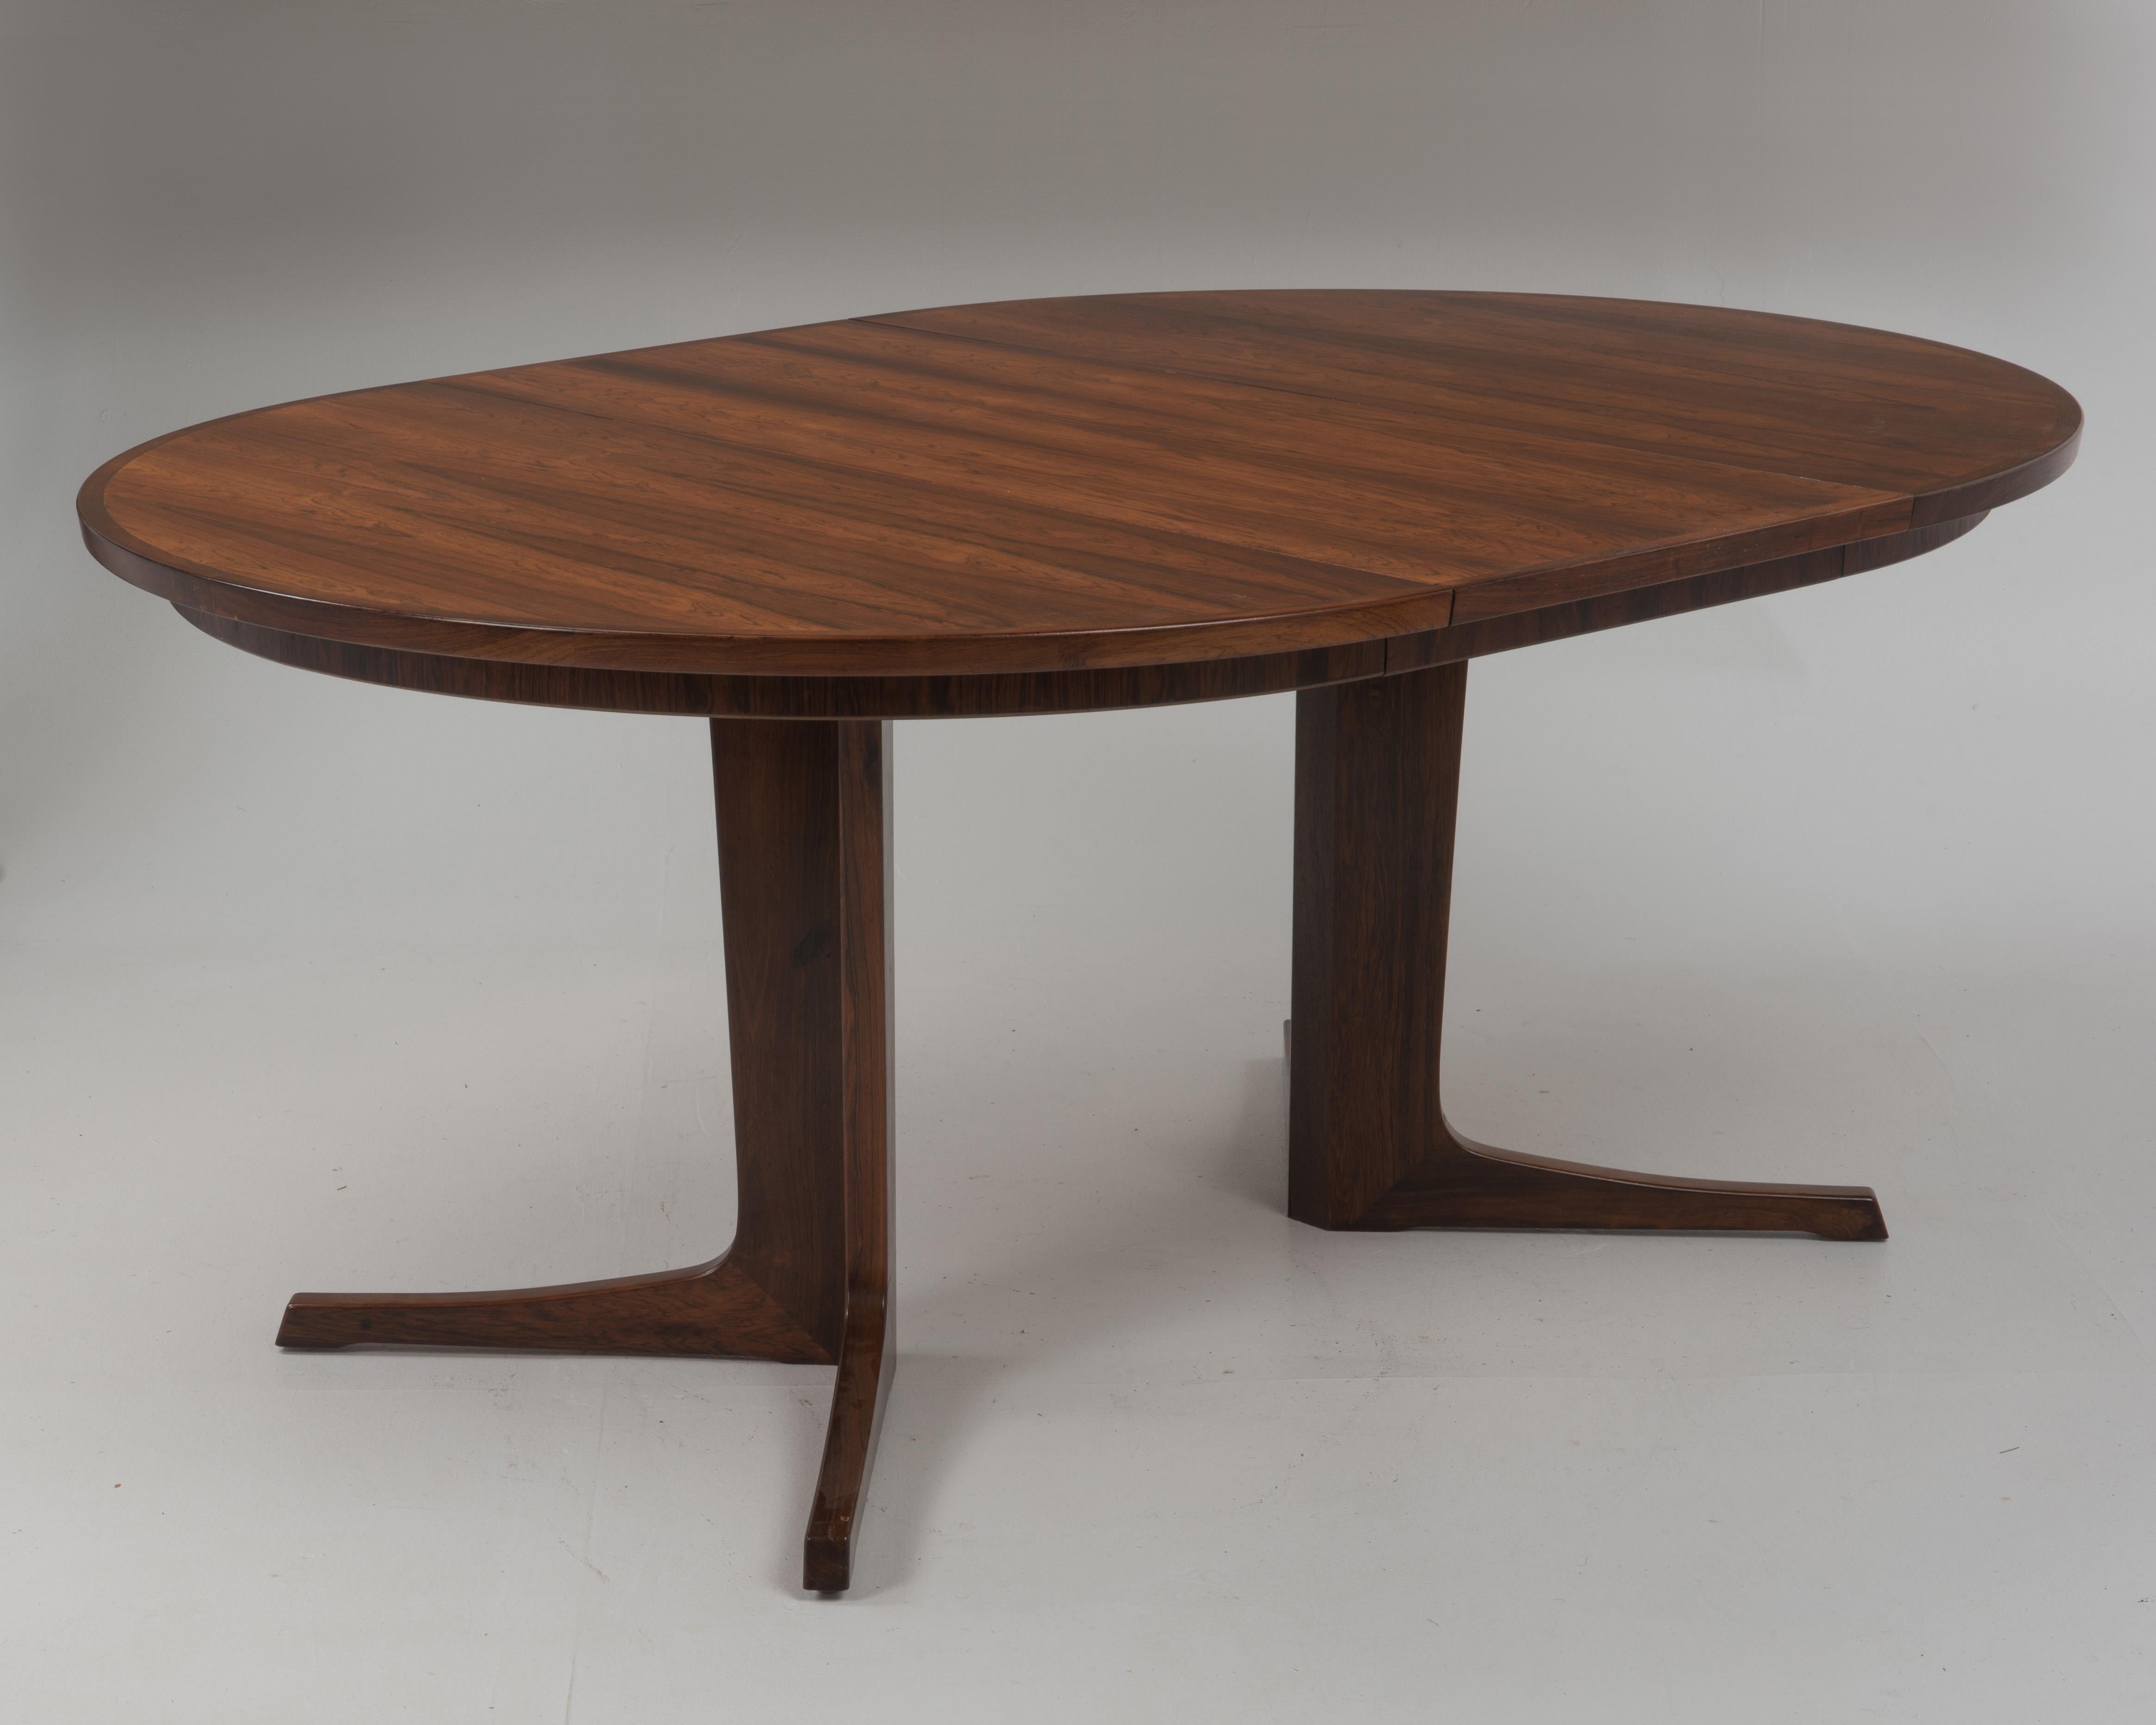 A stunning Bernhard Pedersen & Son rosewood dining table. Book matched rosewood top and two 19.25